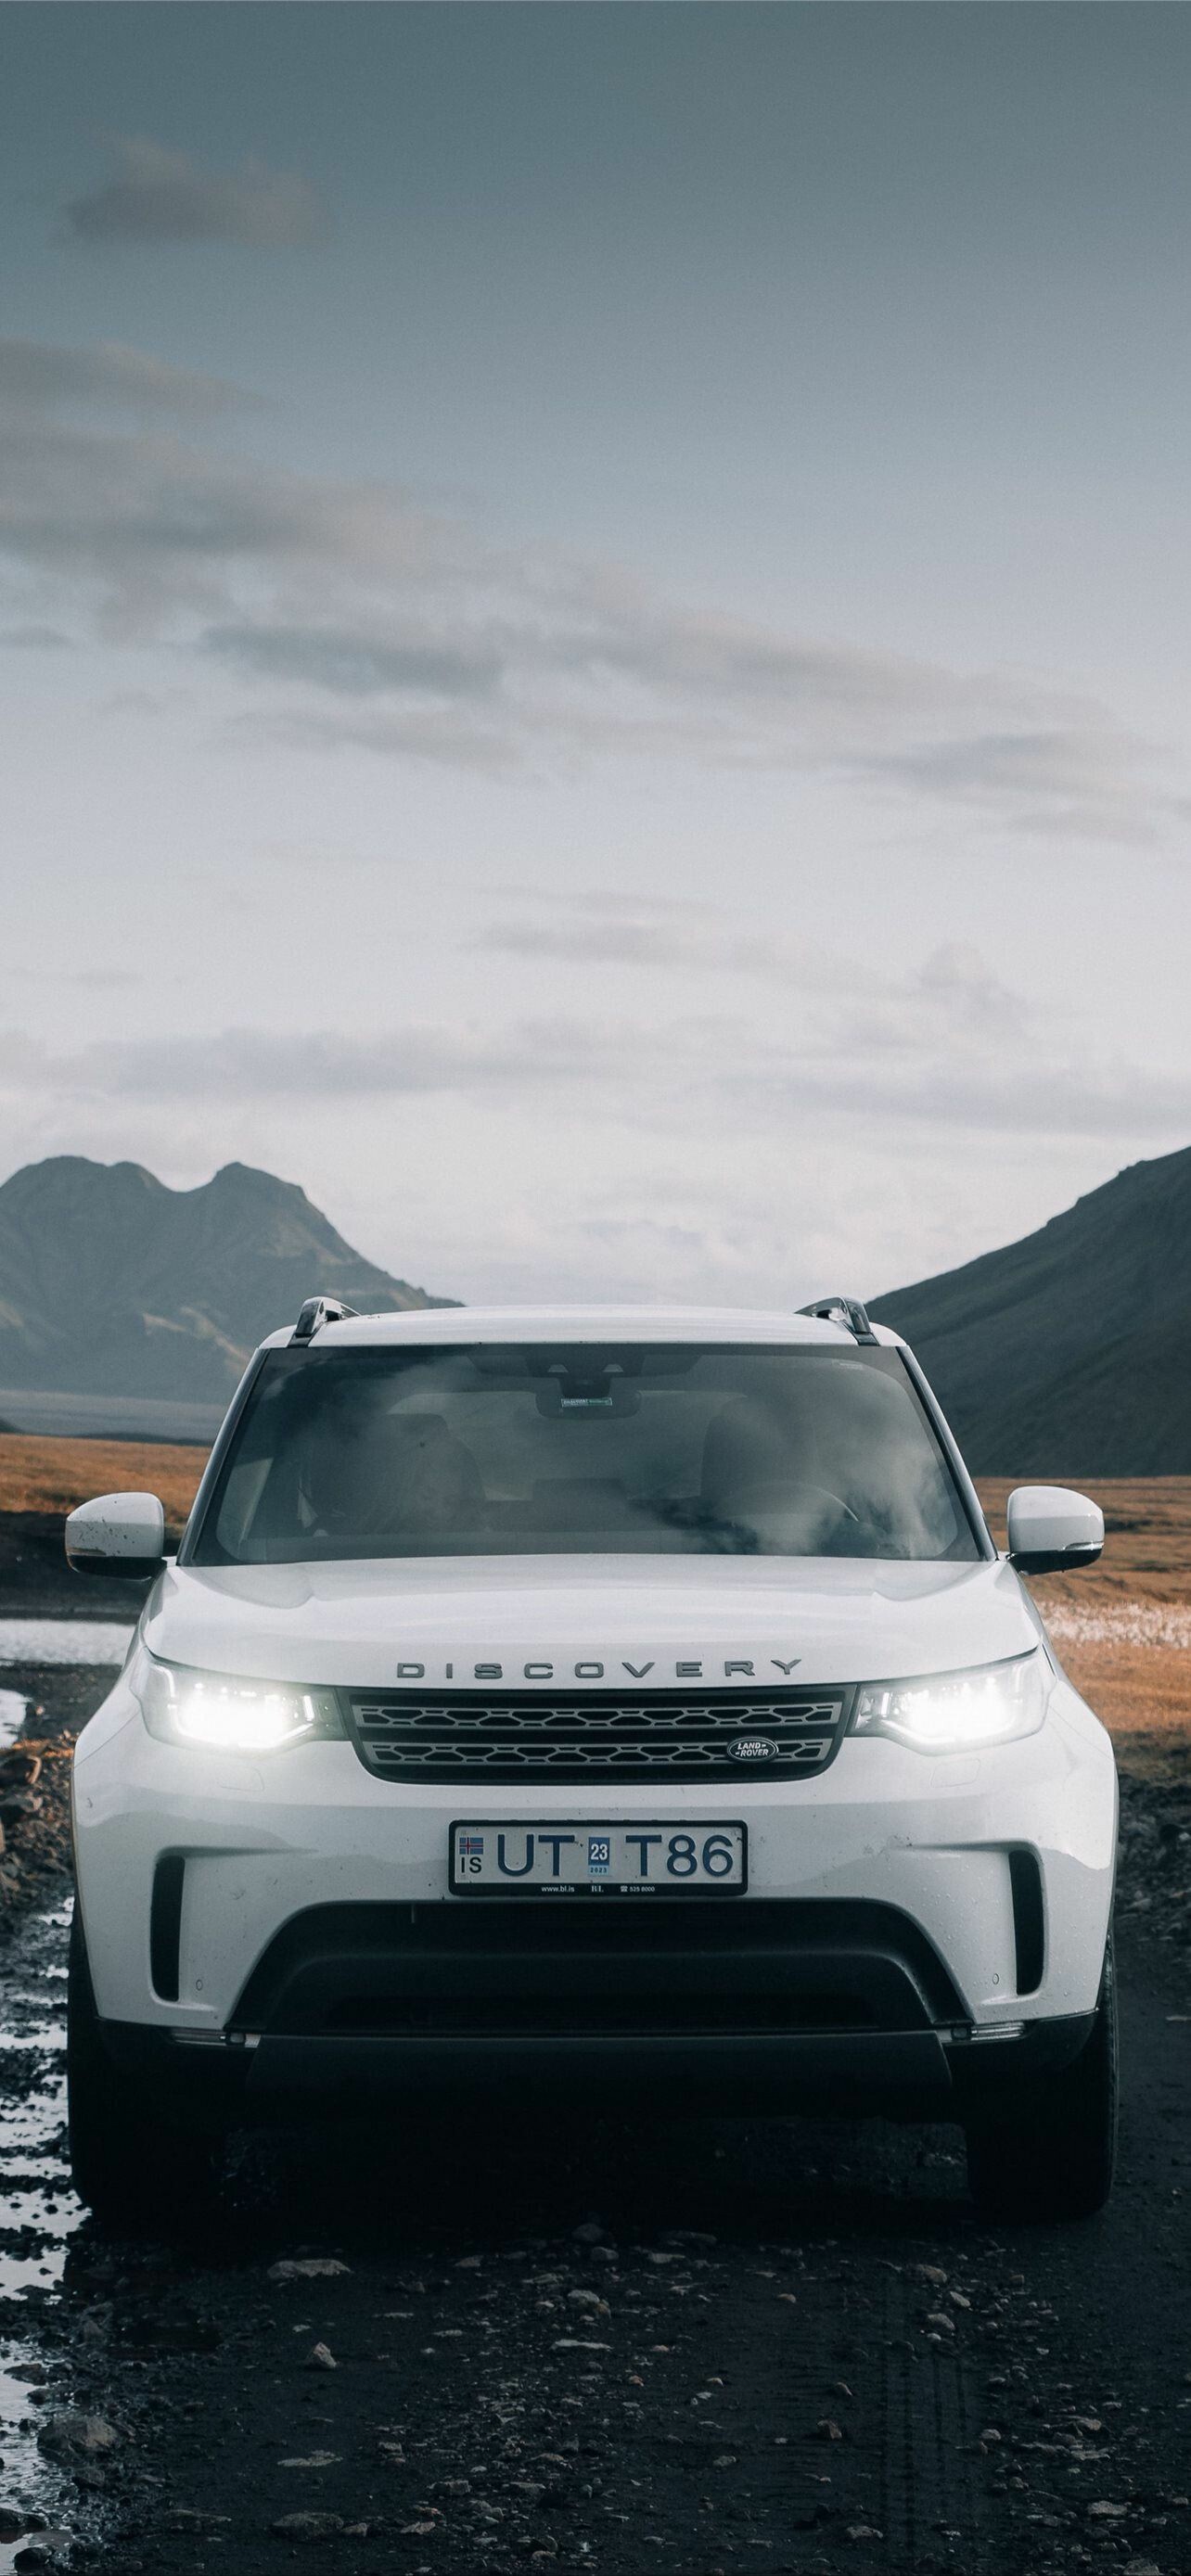 Land Rover: Model Discovery, British automotive brand, as a company has existed since 1978. 1290x2780 HD Background.